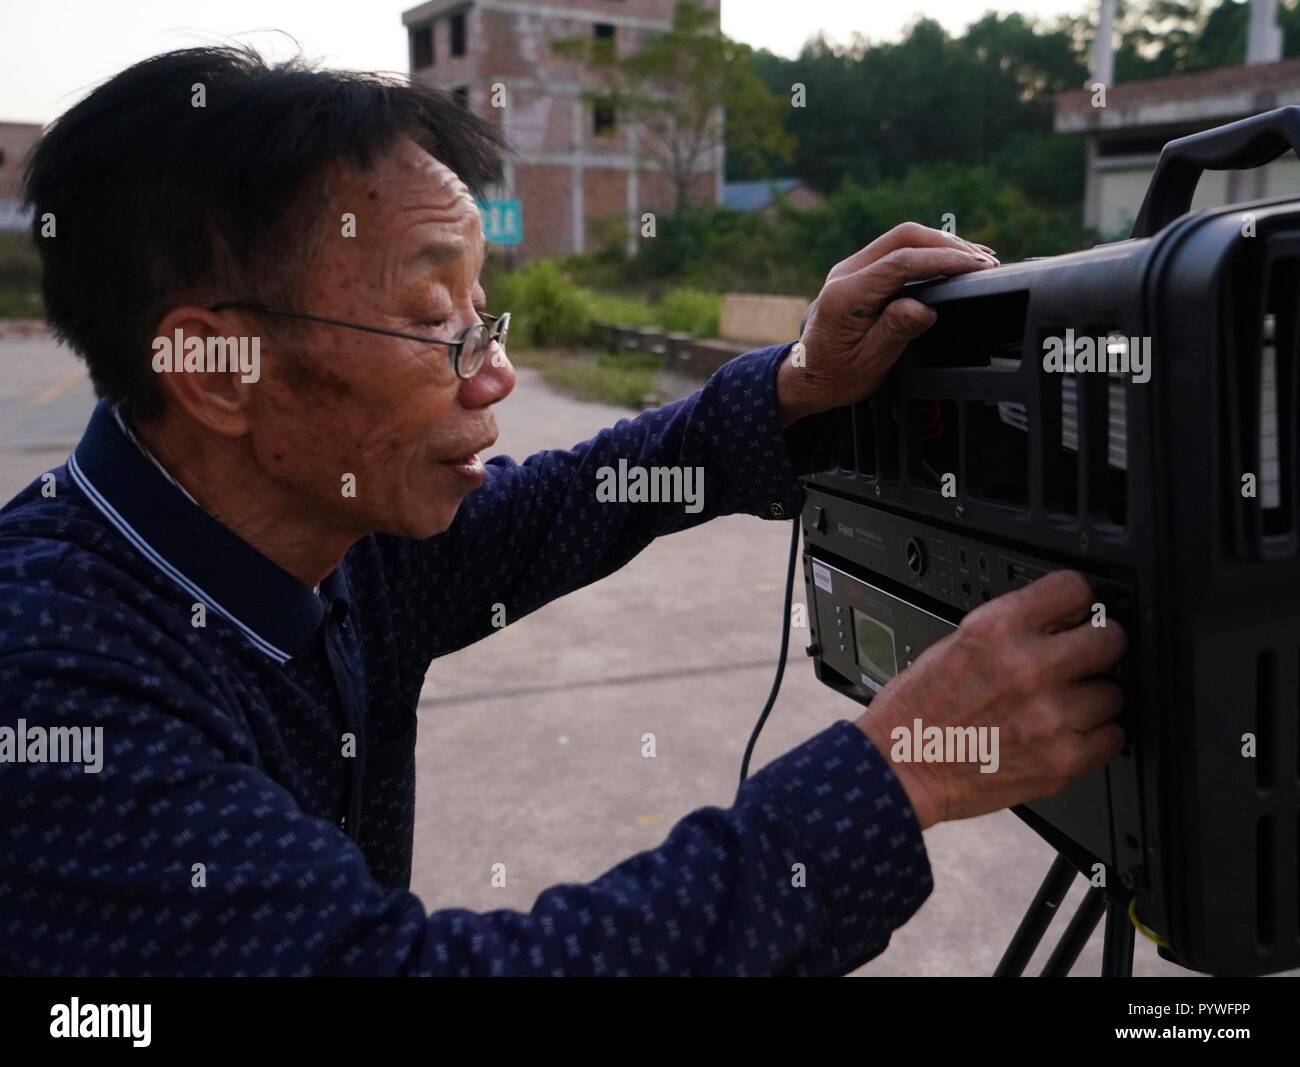 (181031) -- YUDU, Oct. 31, 2018 (Xinhua) -- Zeng Jilian, a 69-year-old movie projectionist, tests the movie projection facilities in Shanxia Village of Yudu County, east China's Jiangxi Province, Oct. 30, 2018. Zeng Jilian had dreamed of being a movie projectionist since he was a kid. In 1975, his dream came true as he became a member of the movie projection team of Kuantian Town in Yudu County. Since then, he has traveled to diffrent villages and shown numerous movies for local people. Now although retired, Zeng still held on to the career he took for over 40 years, giving over 20 times of sh Stock Photo